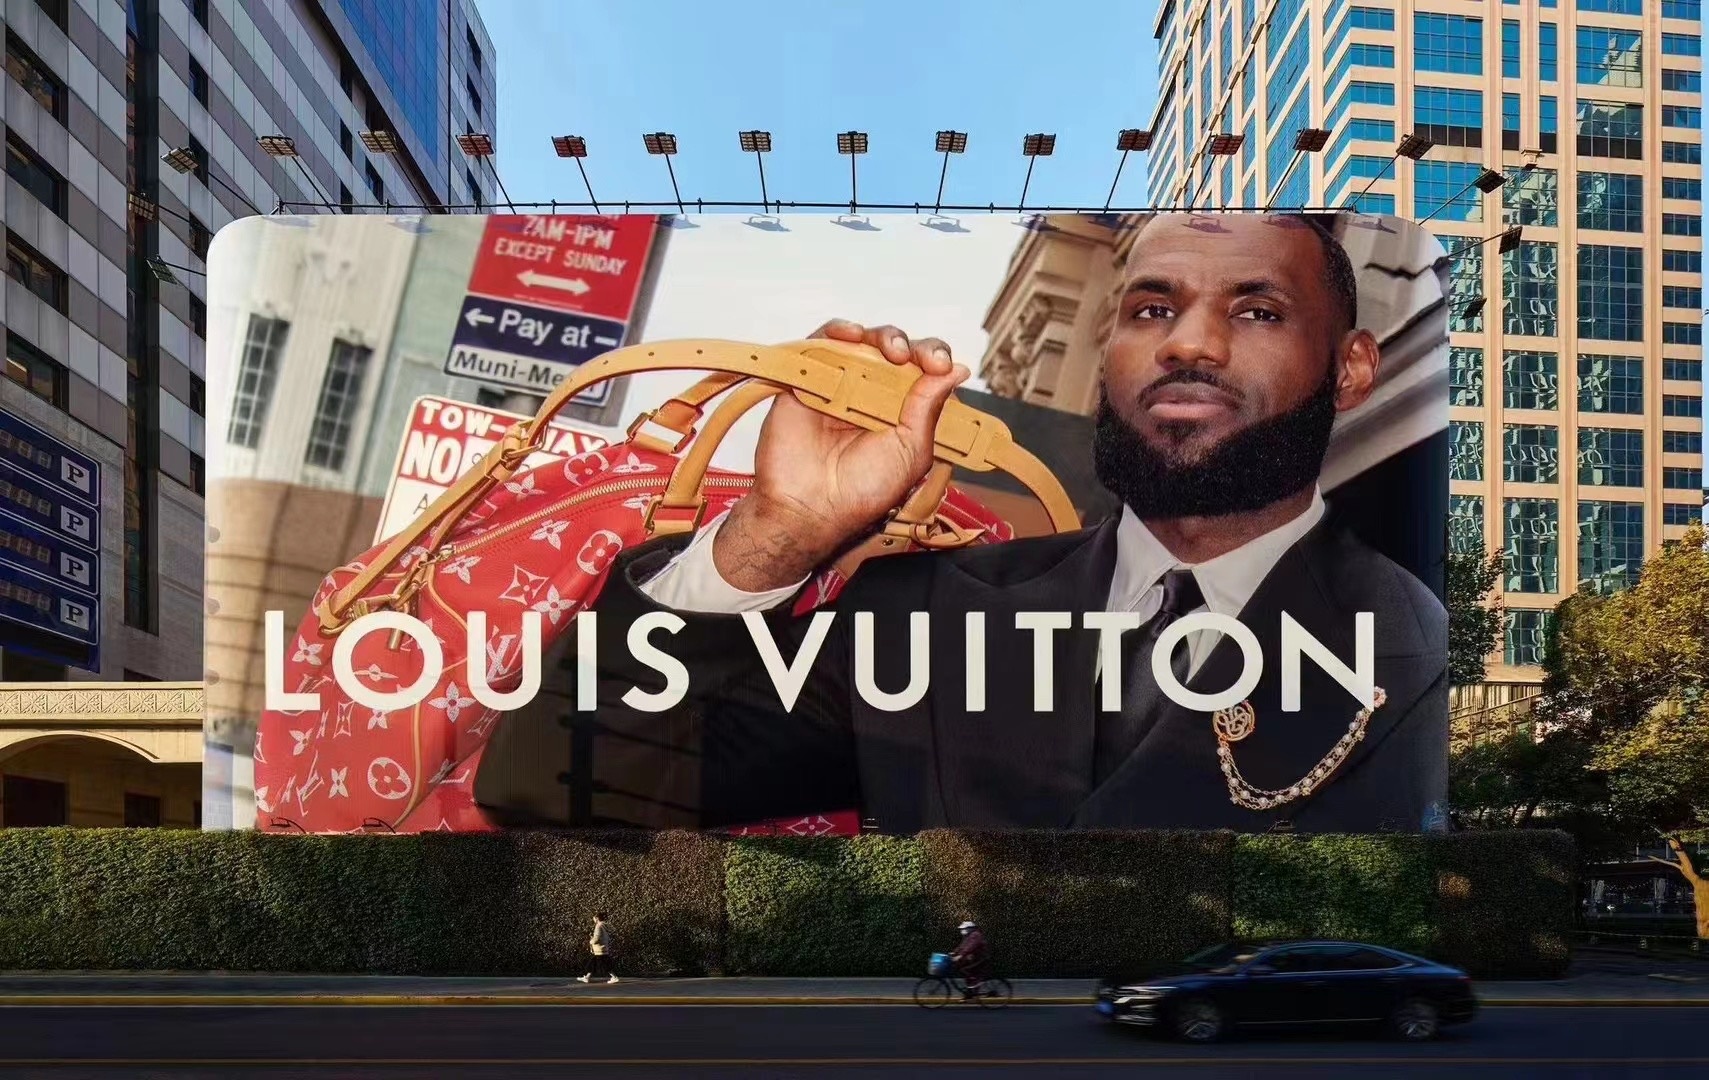 Louis Vuitton’s new Speedy campaign starring Lebron James has been mounted in Shanghai city center. Photo: Louis Vuitton
